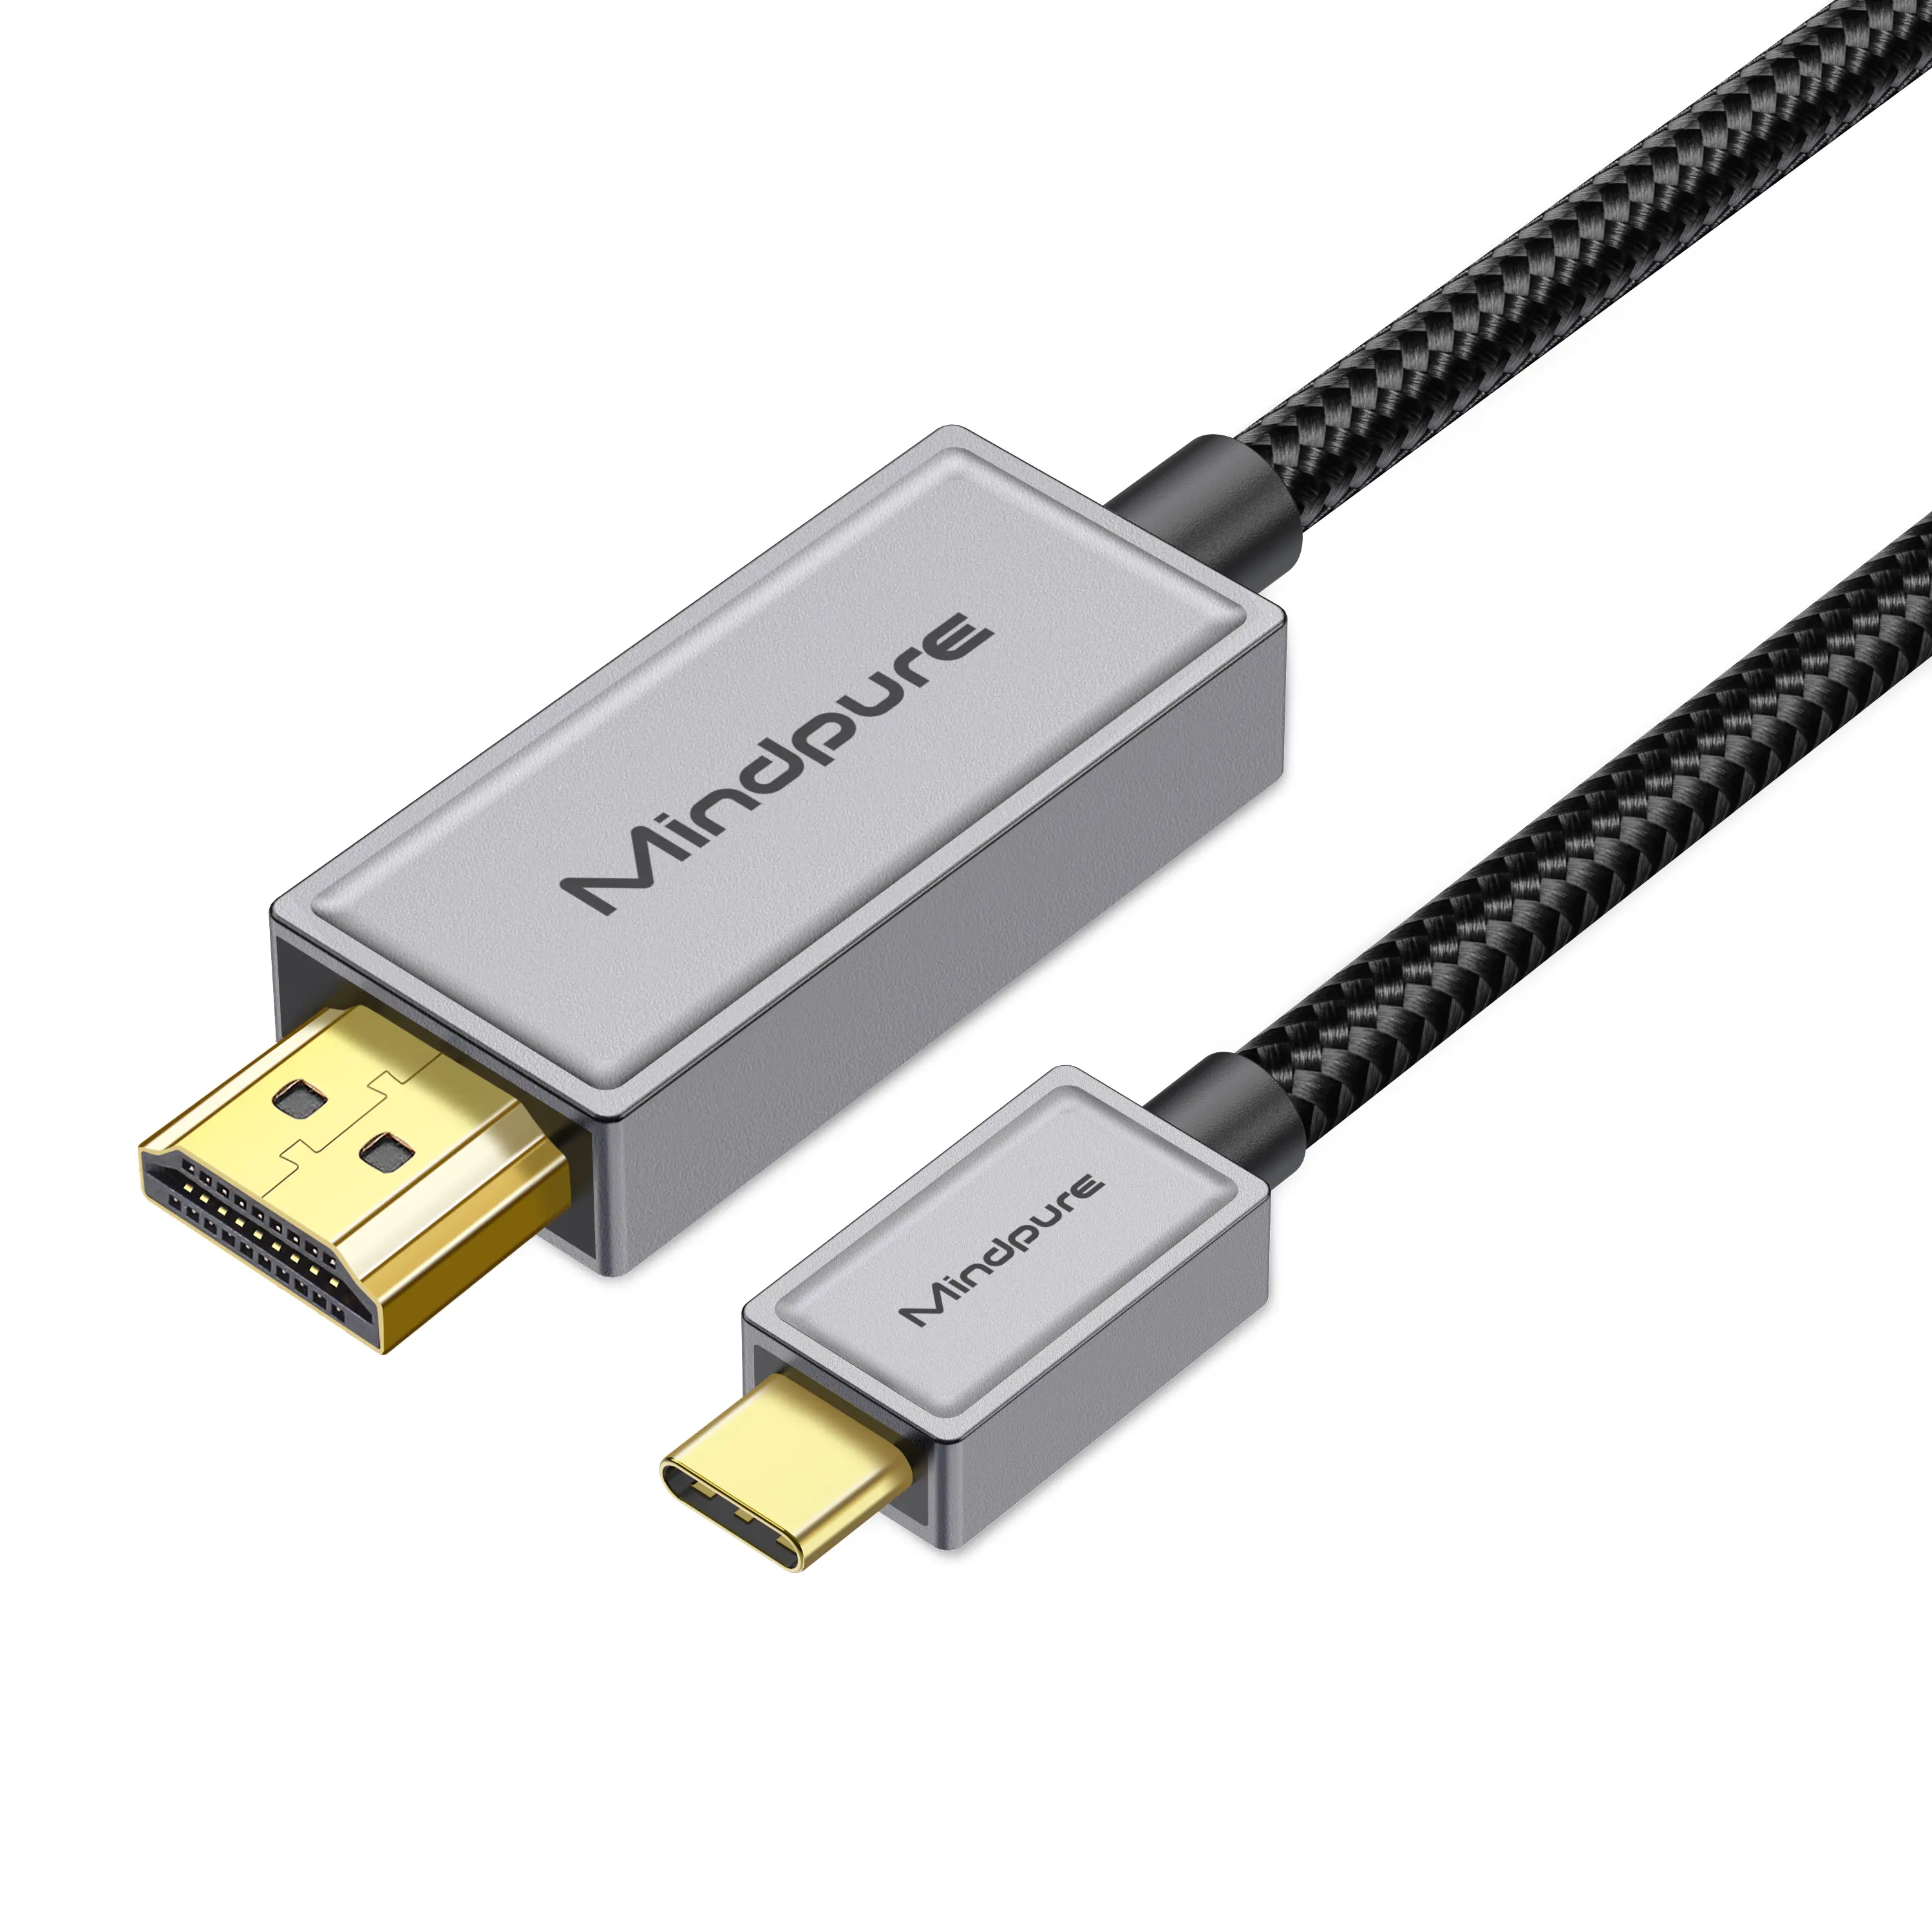 Mindpureアルミニウムナイロン編組1.8メートル4K60Hz a tipo c TYPE-C USB-C 3.1 to HDMIHD Cable for connect mobile phone to tv